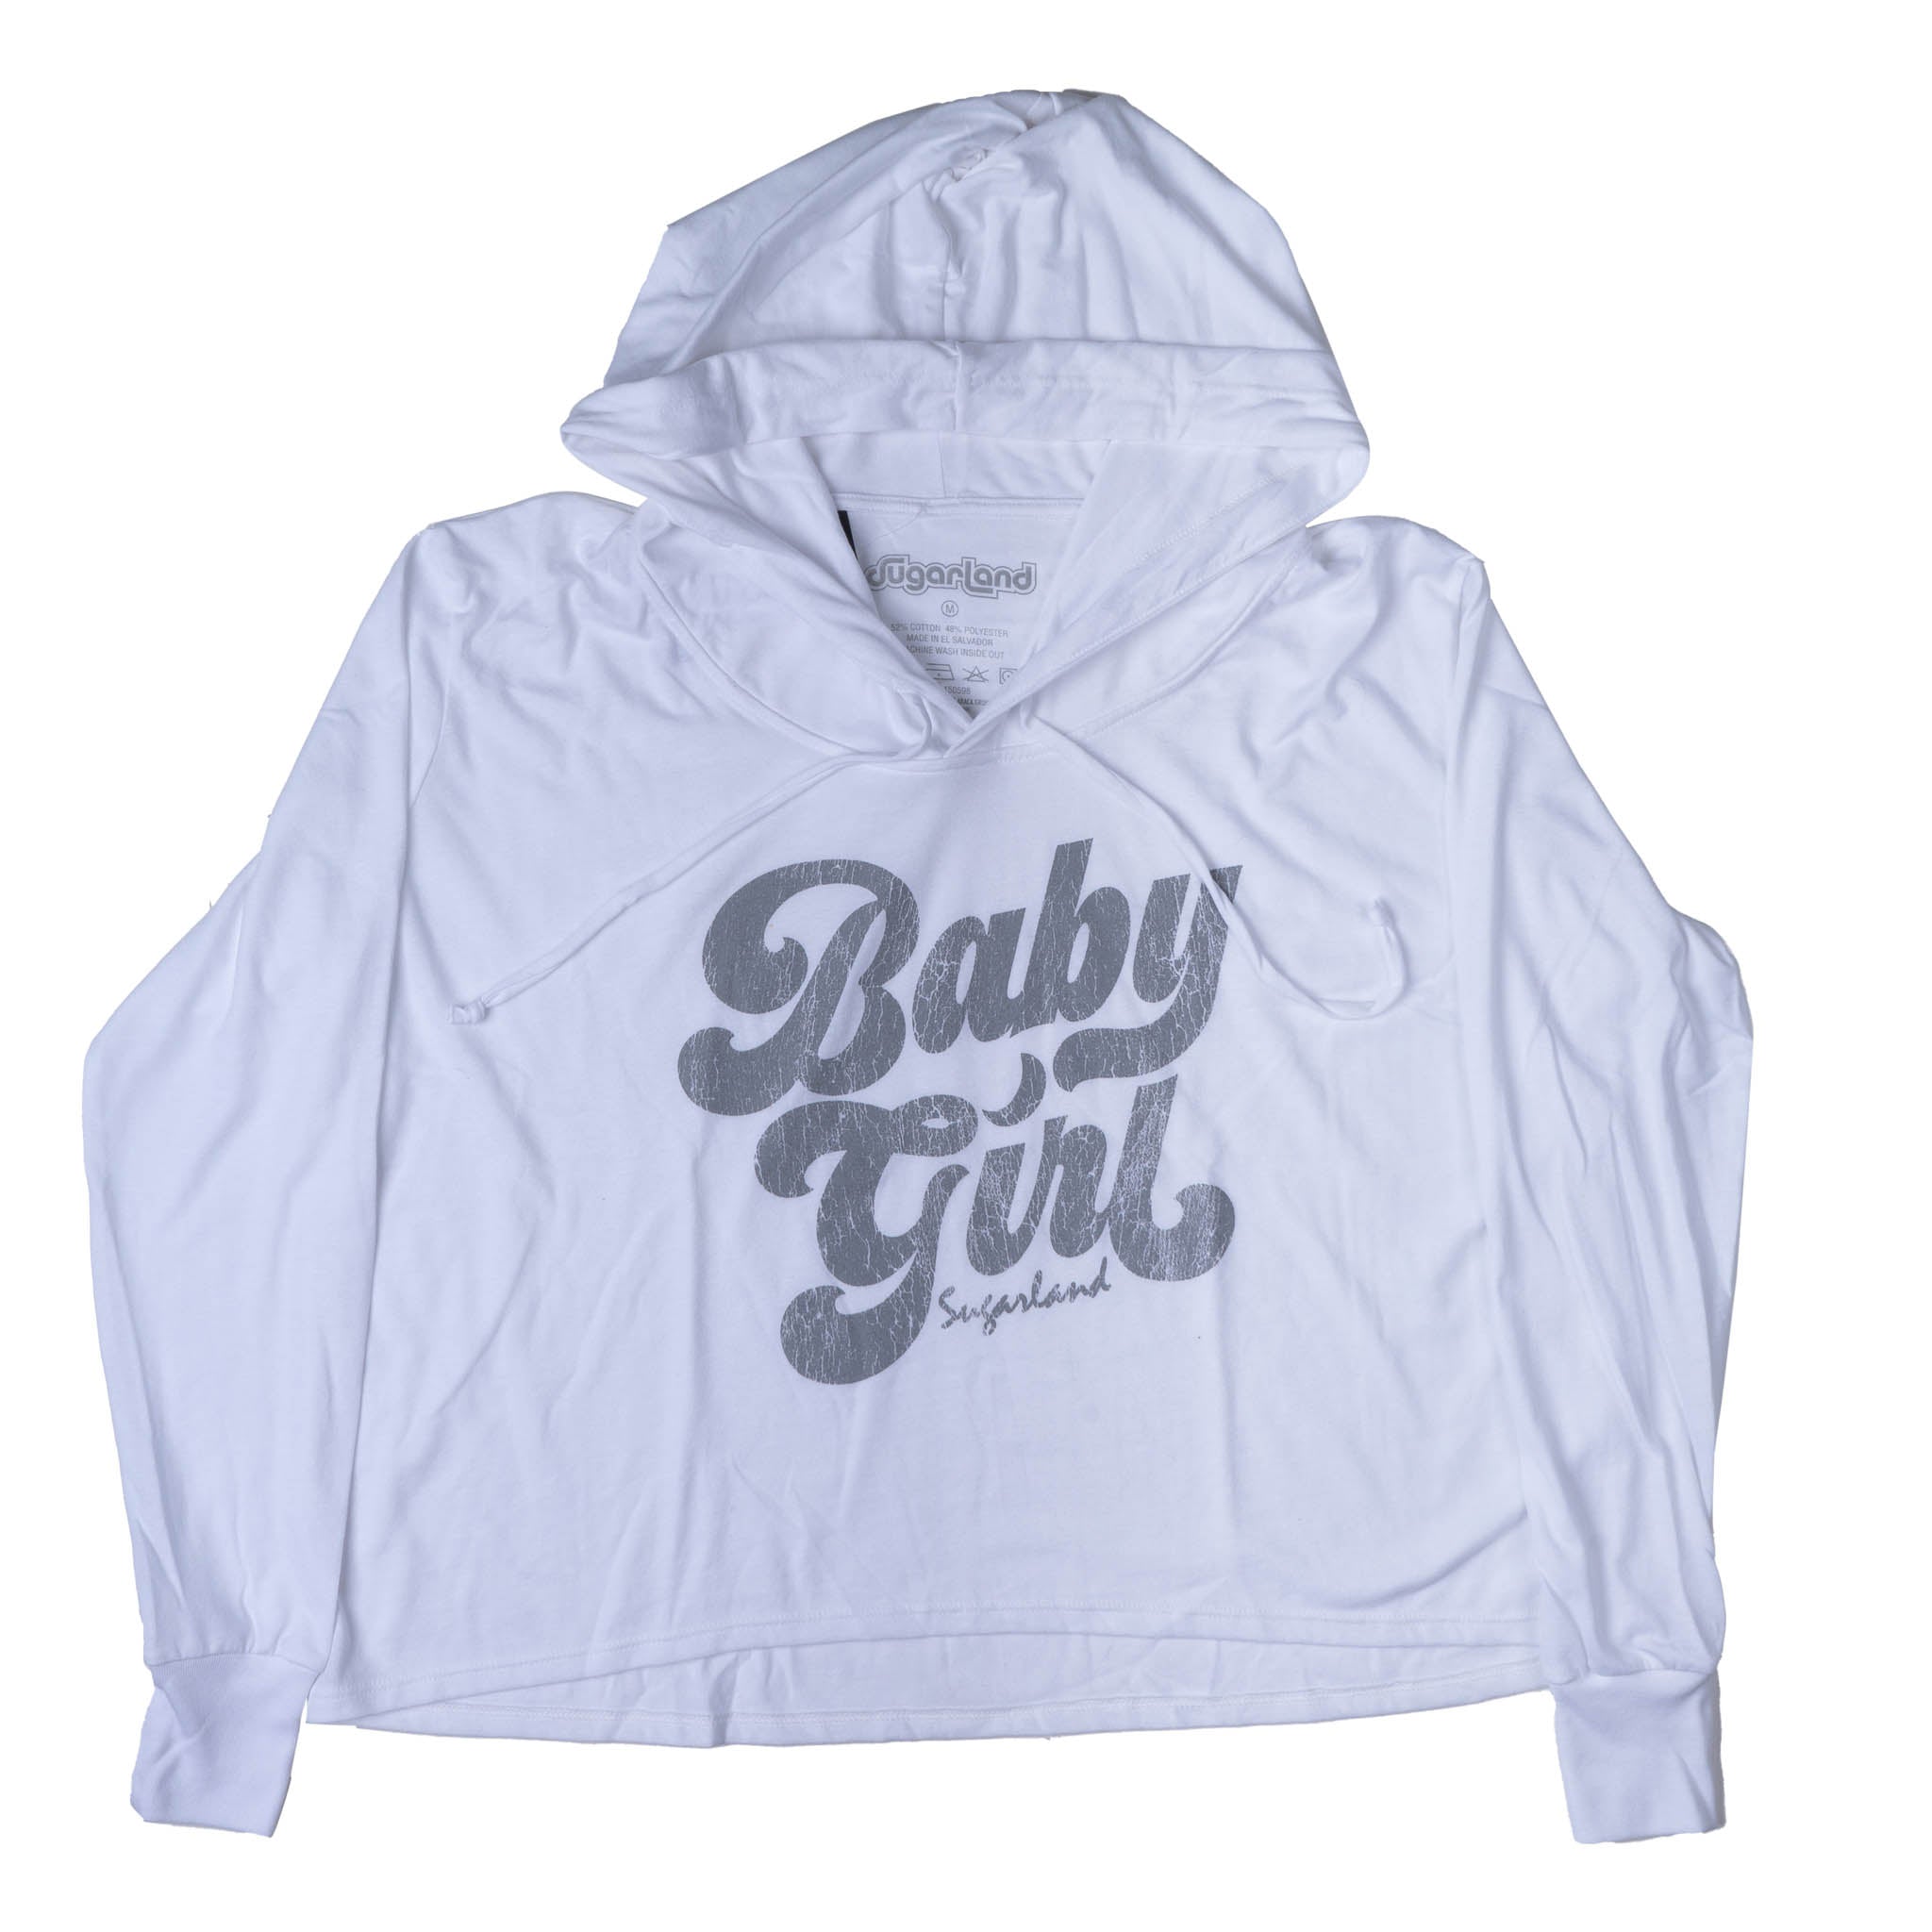 LICENSED SUGARLAND WOMENS CROPPED HOODIE WHITE - SGR-83920